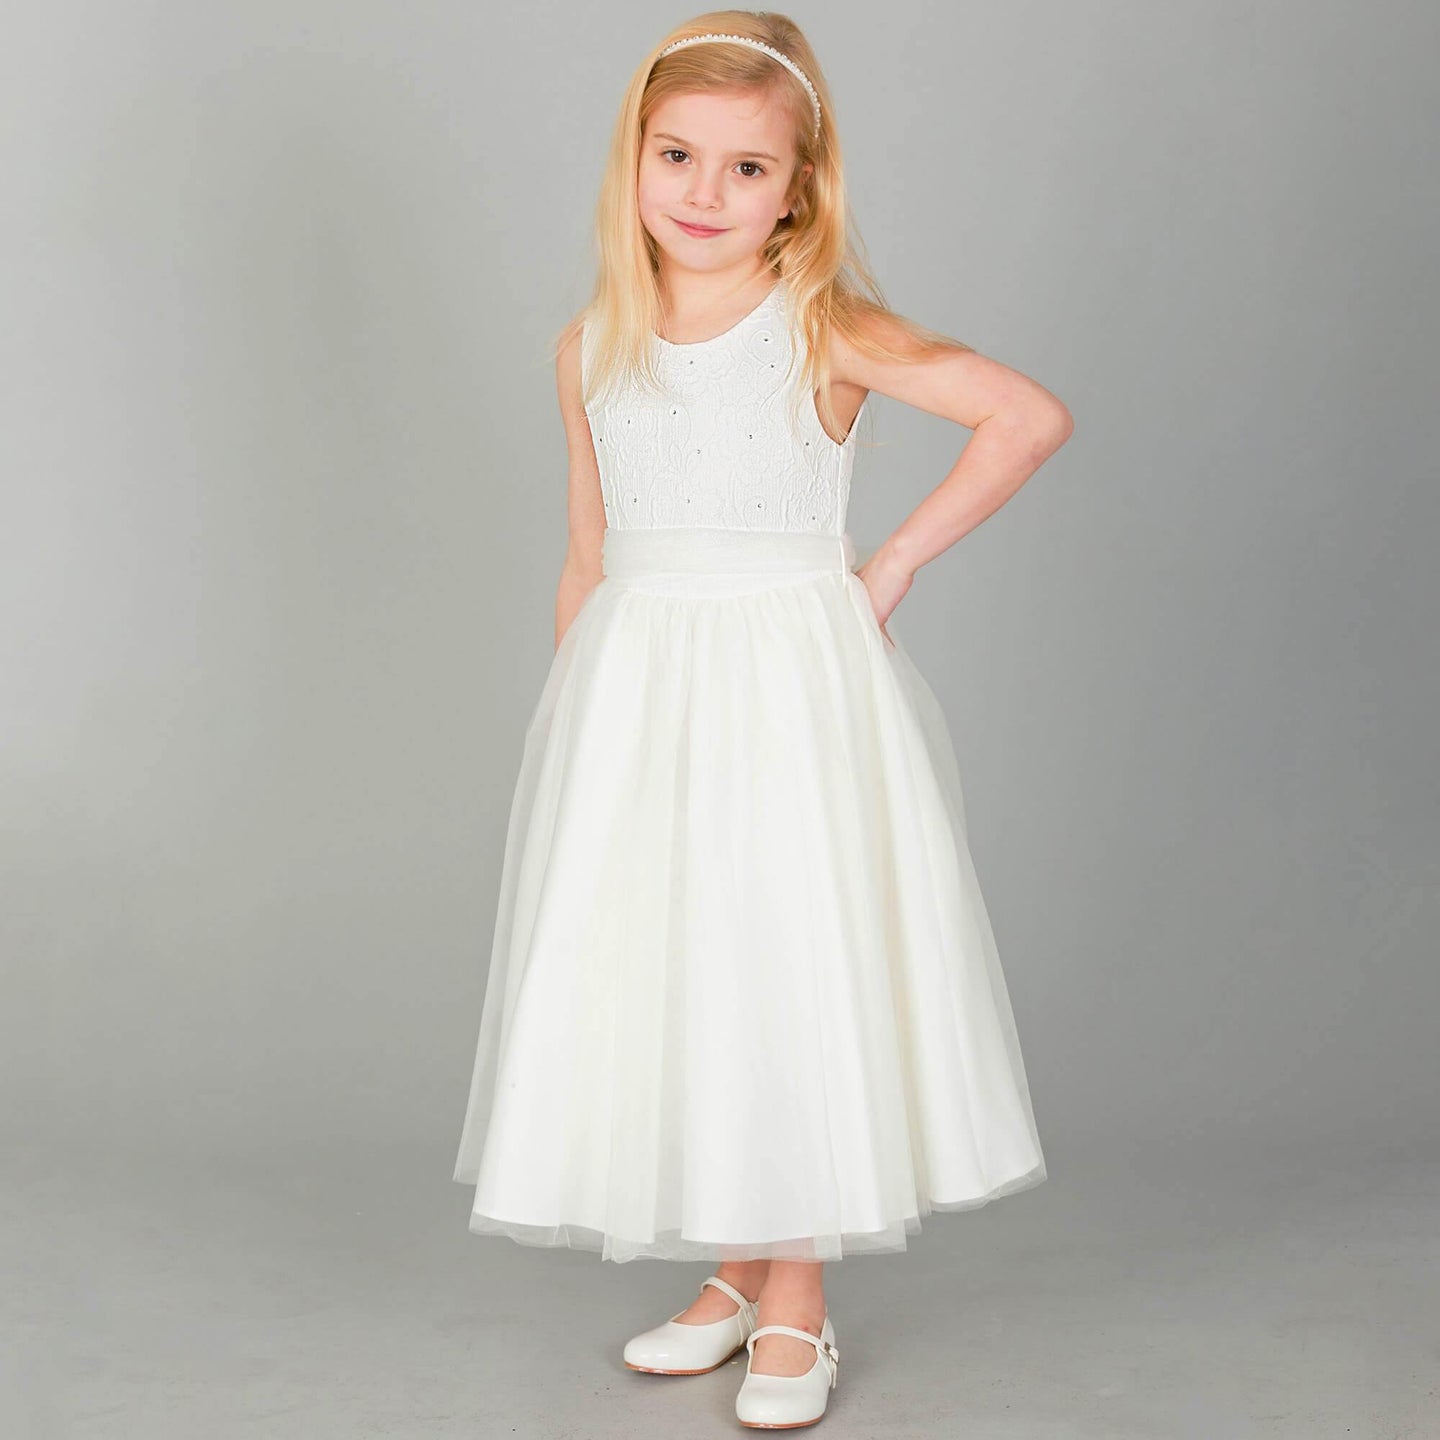 Blonde girl wearing ivory coloured party dress  and whit party shoes